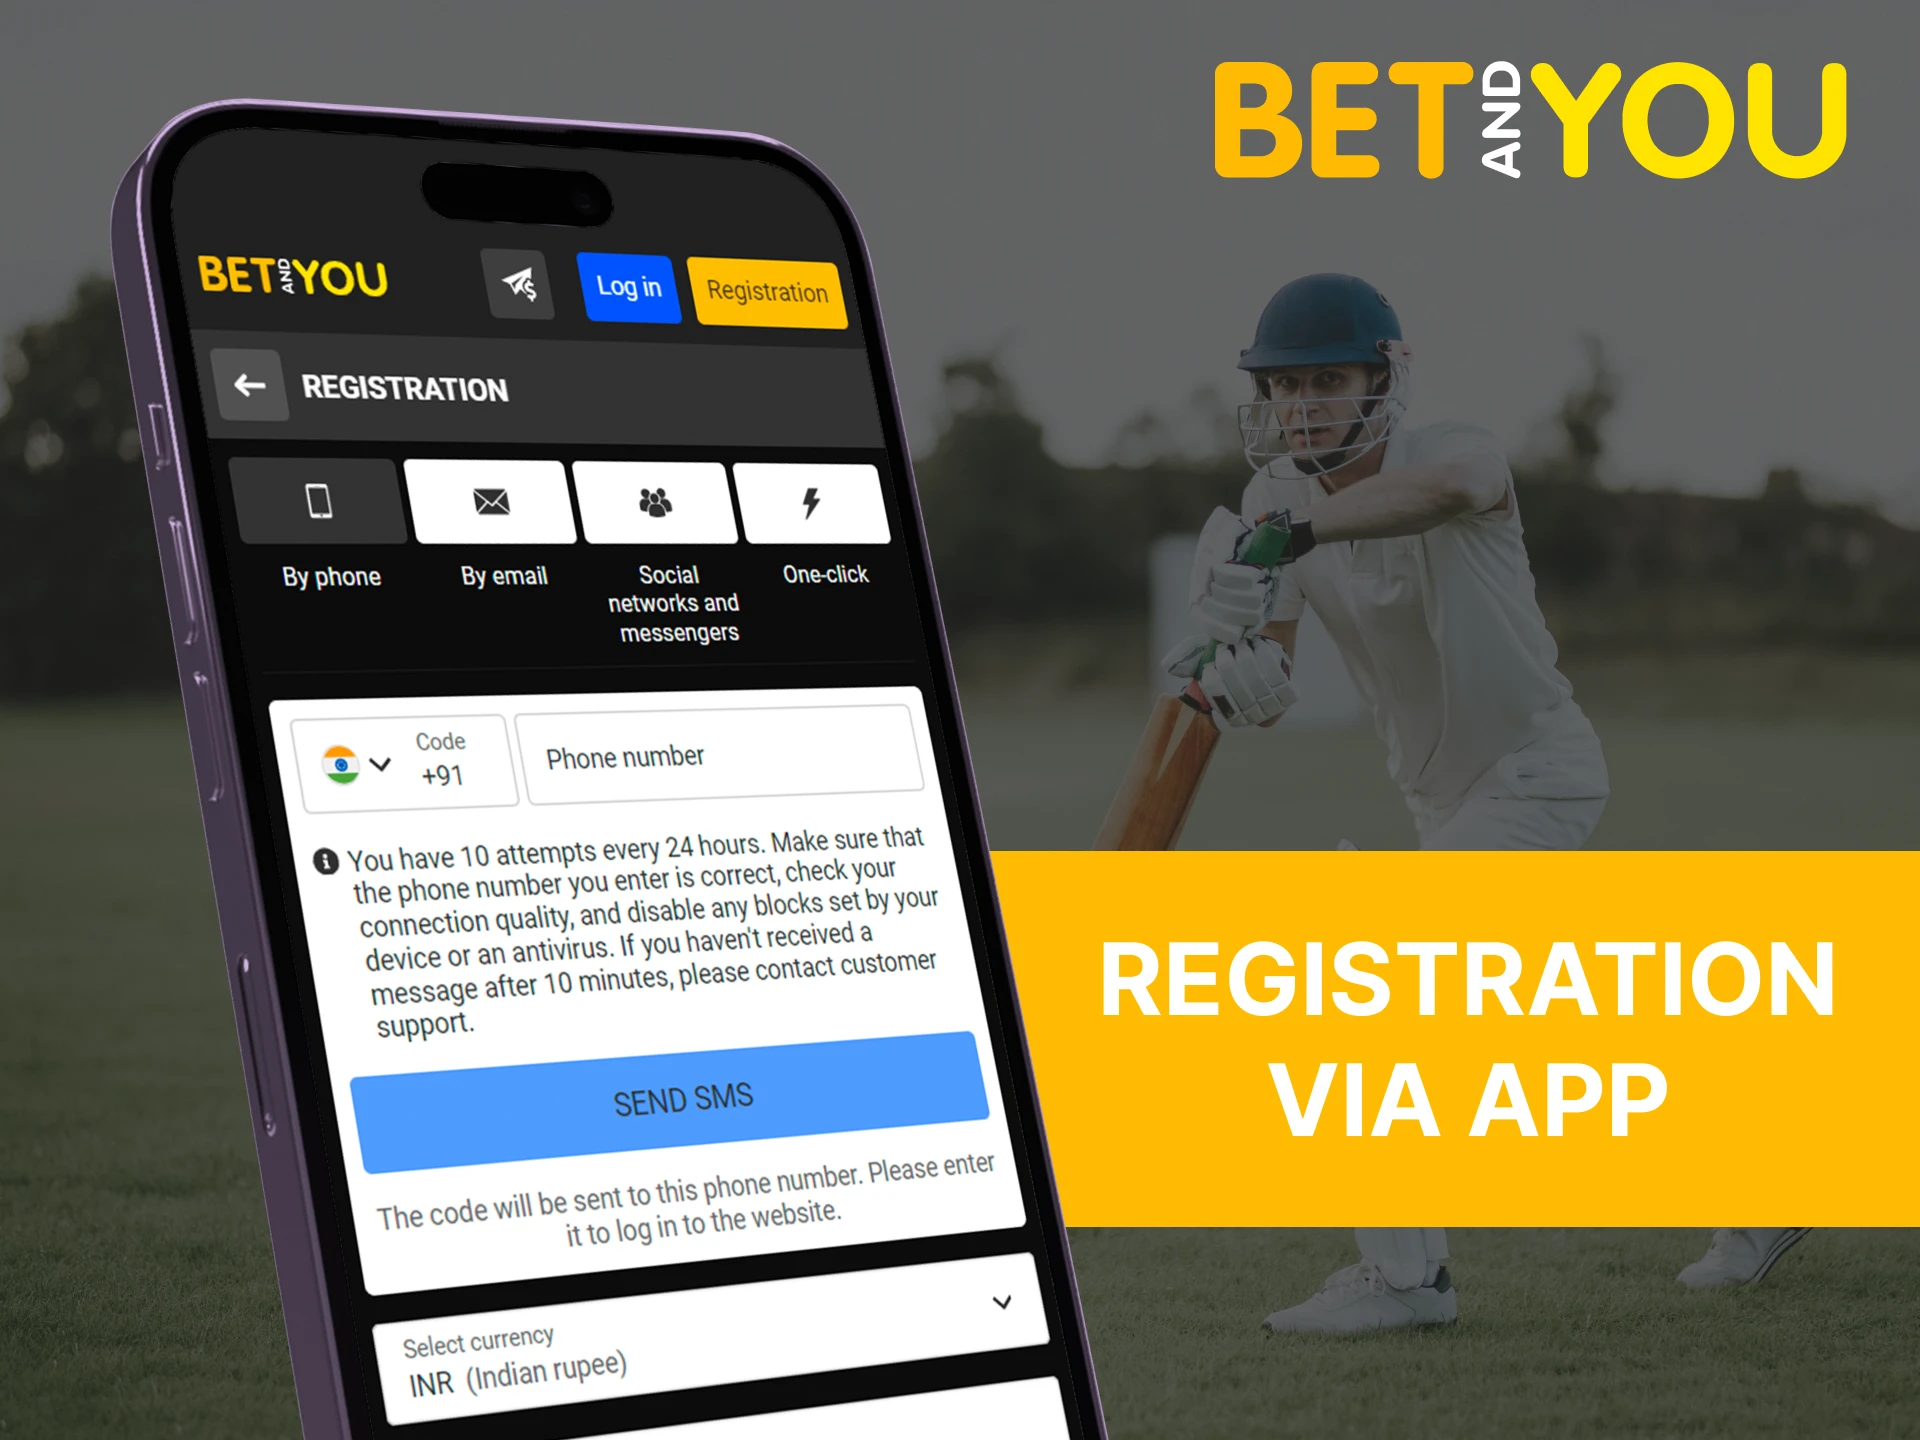 You can create your account using the Betandyou mobile app.